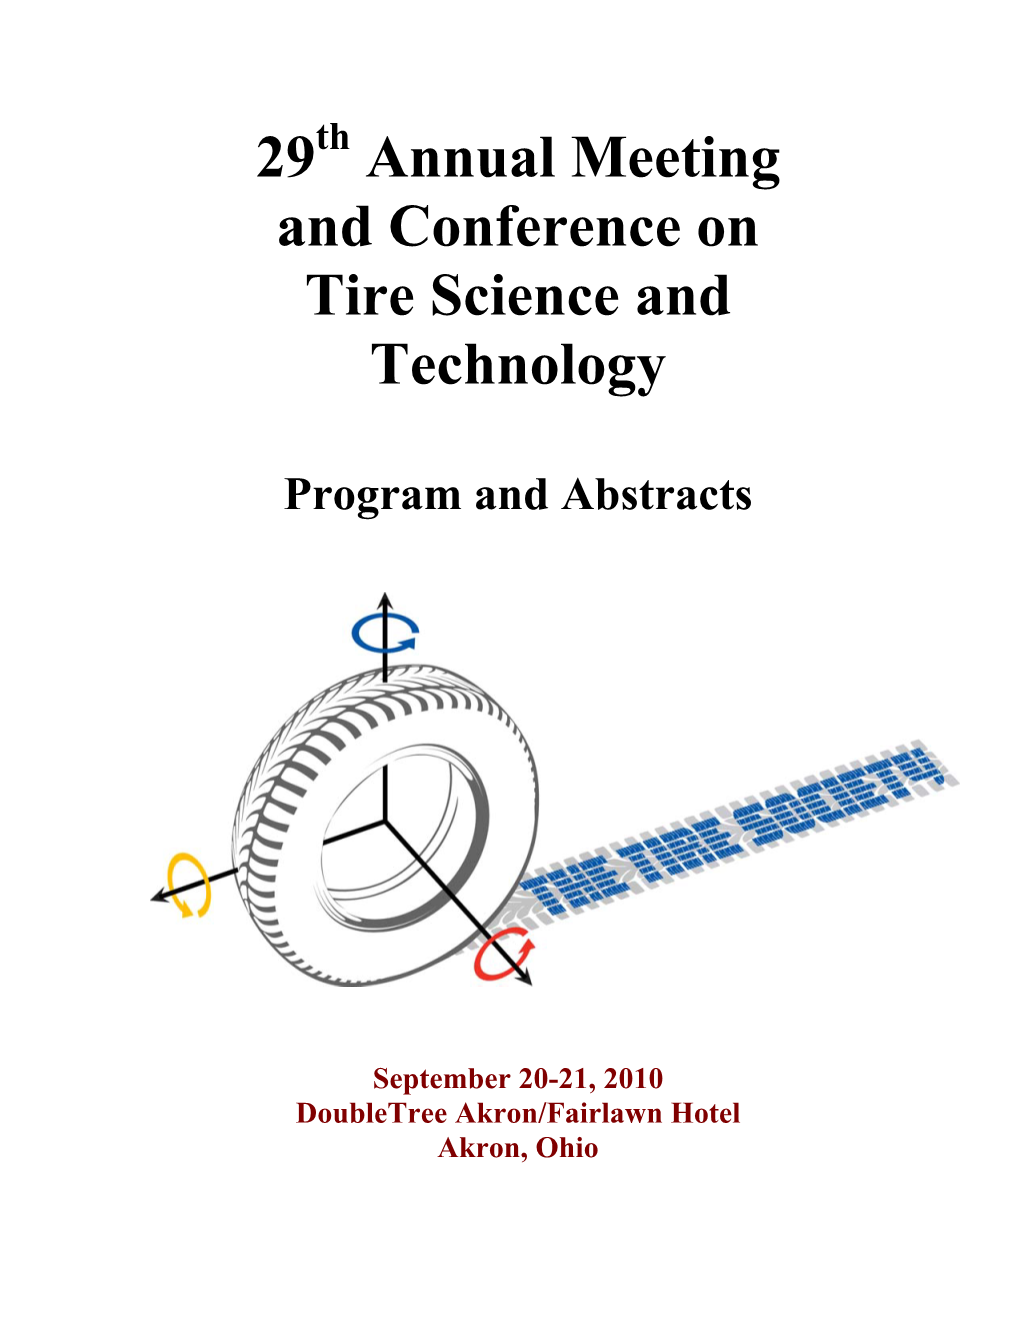 Annual Meeting and Conference on Tire Science and Technology